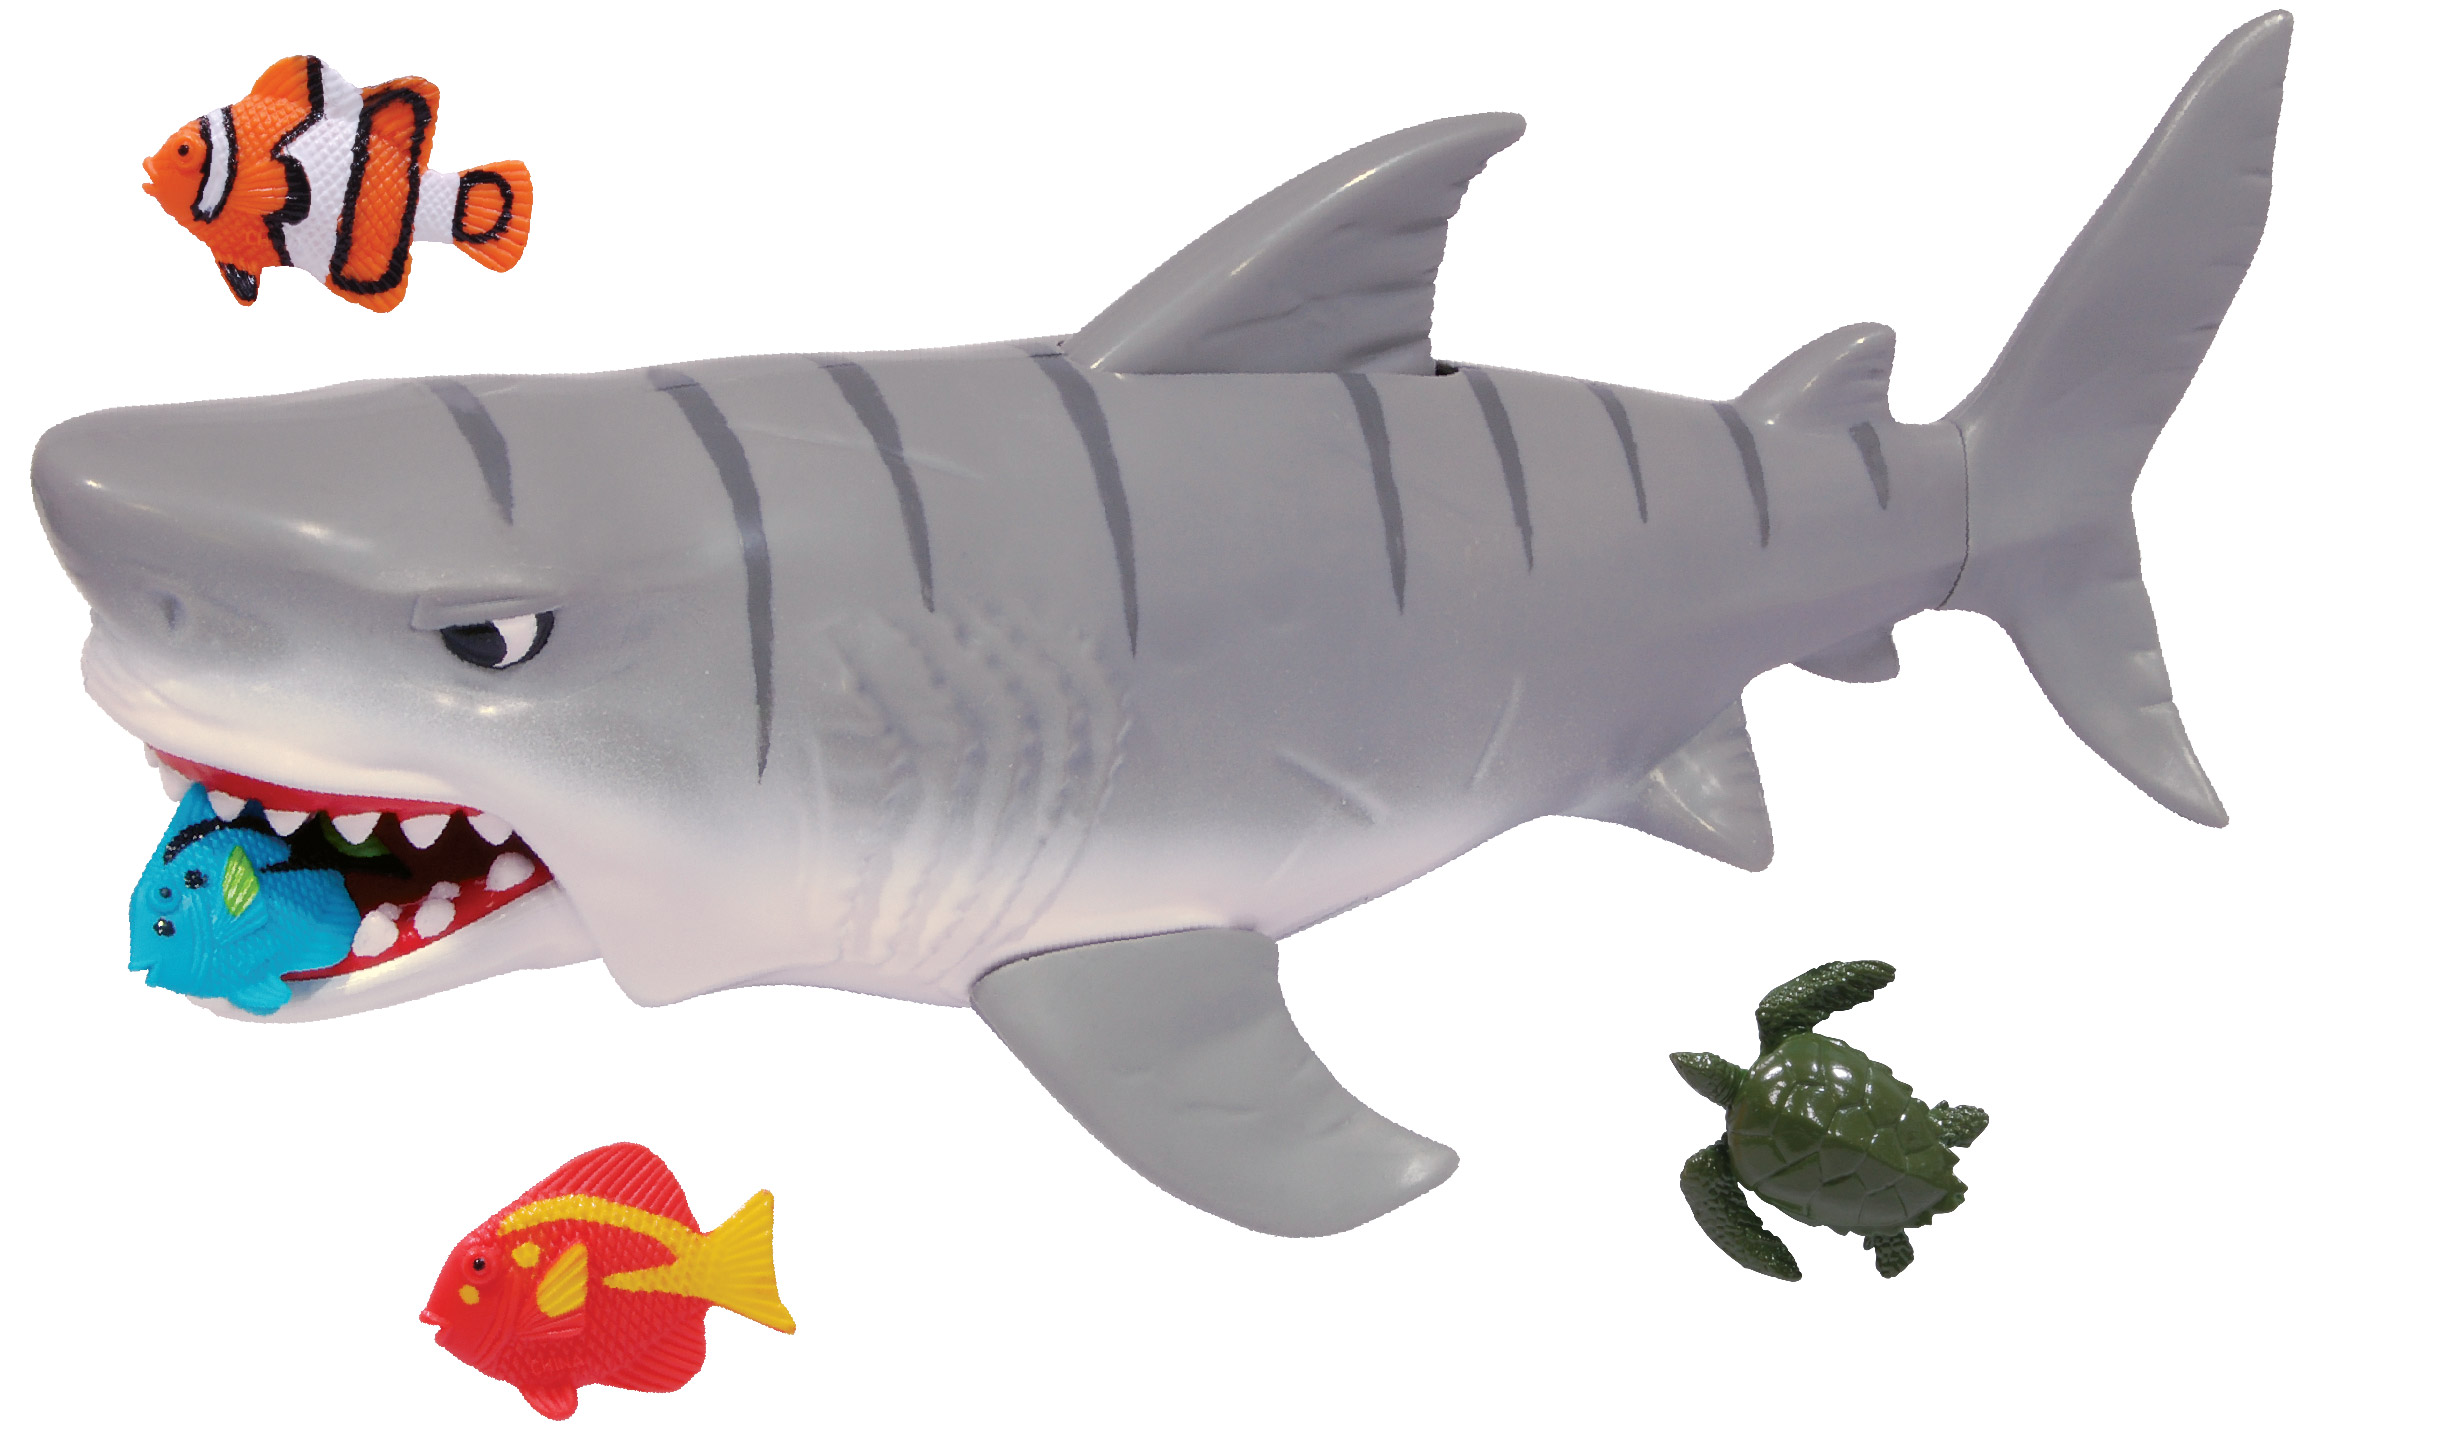 Adventure Force Crunch & Carry Shark Toy, 5 Pieces - image 2 of 5